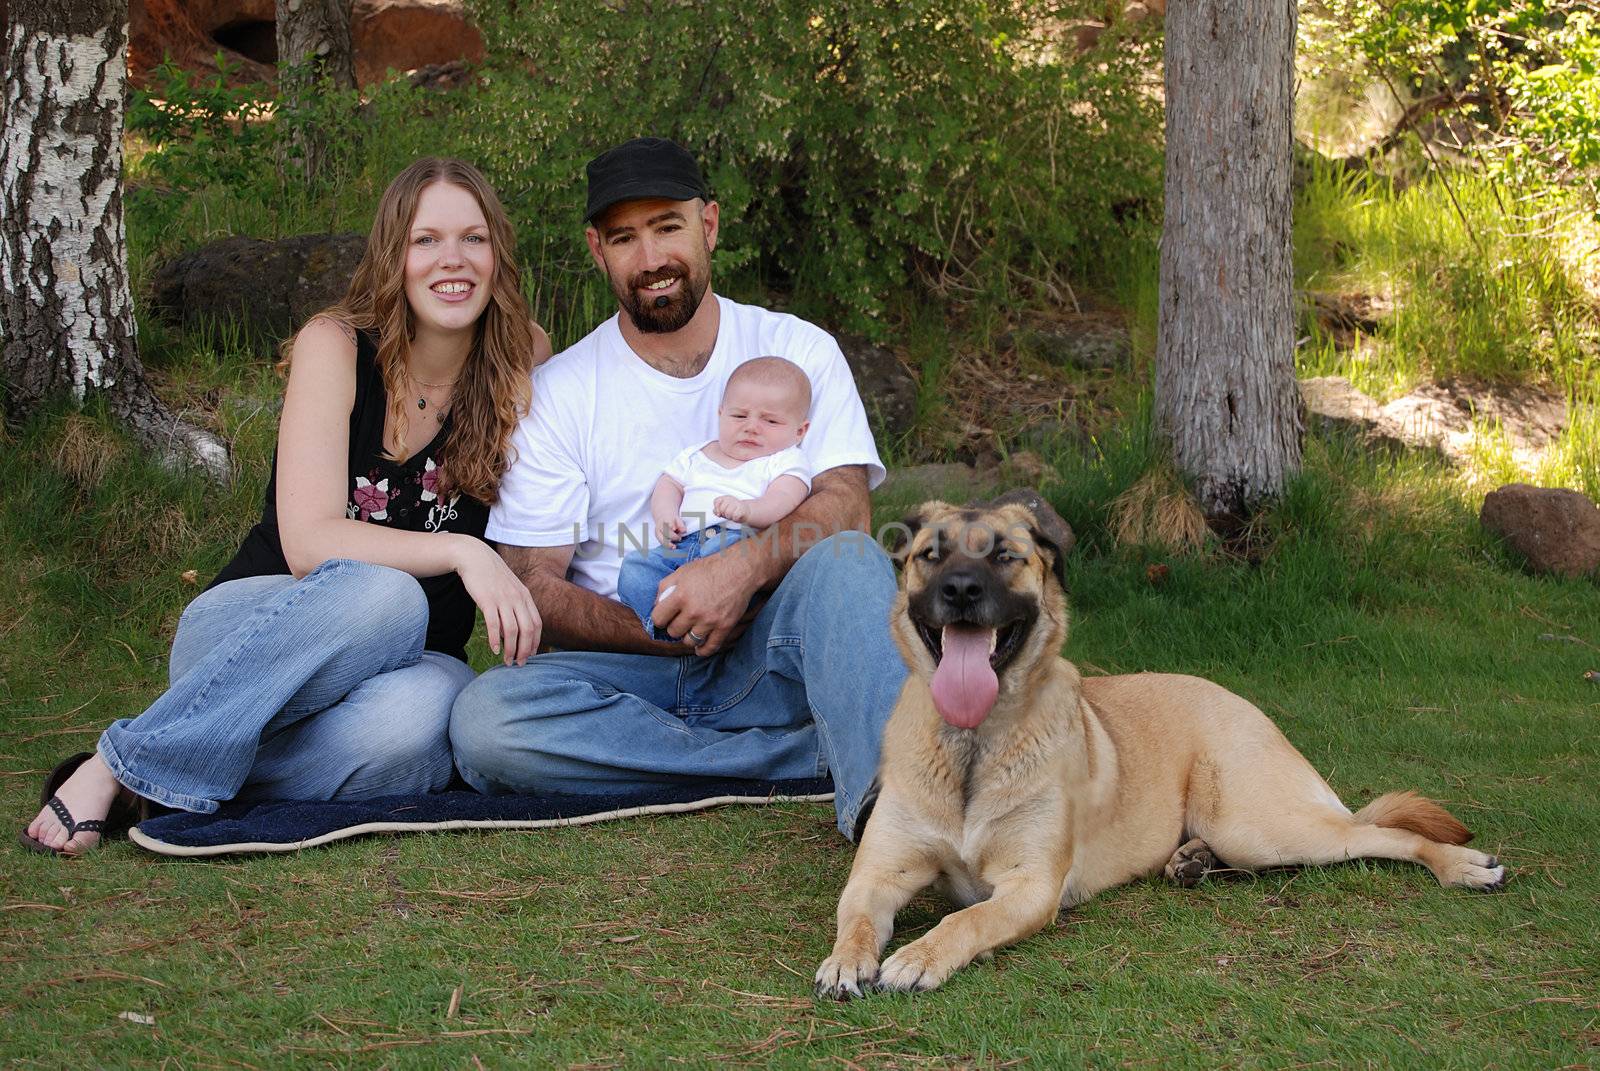 Horizontal image of a young modern family of three and their dog resting in the park.
